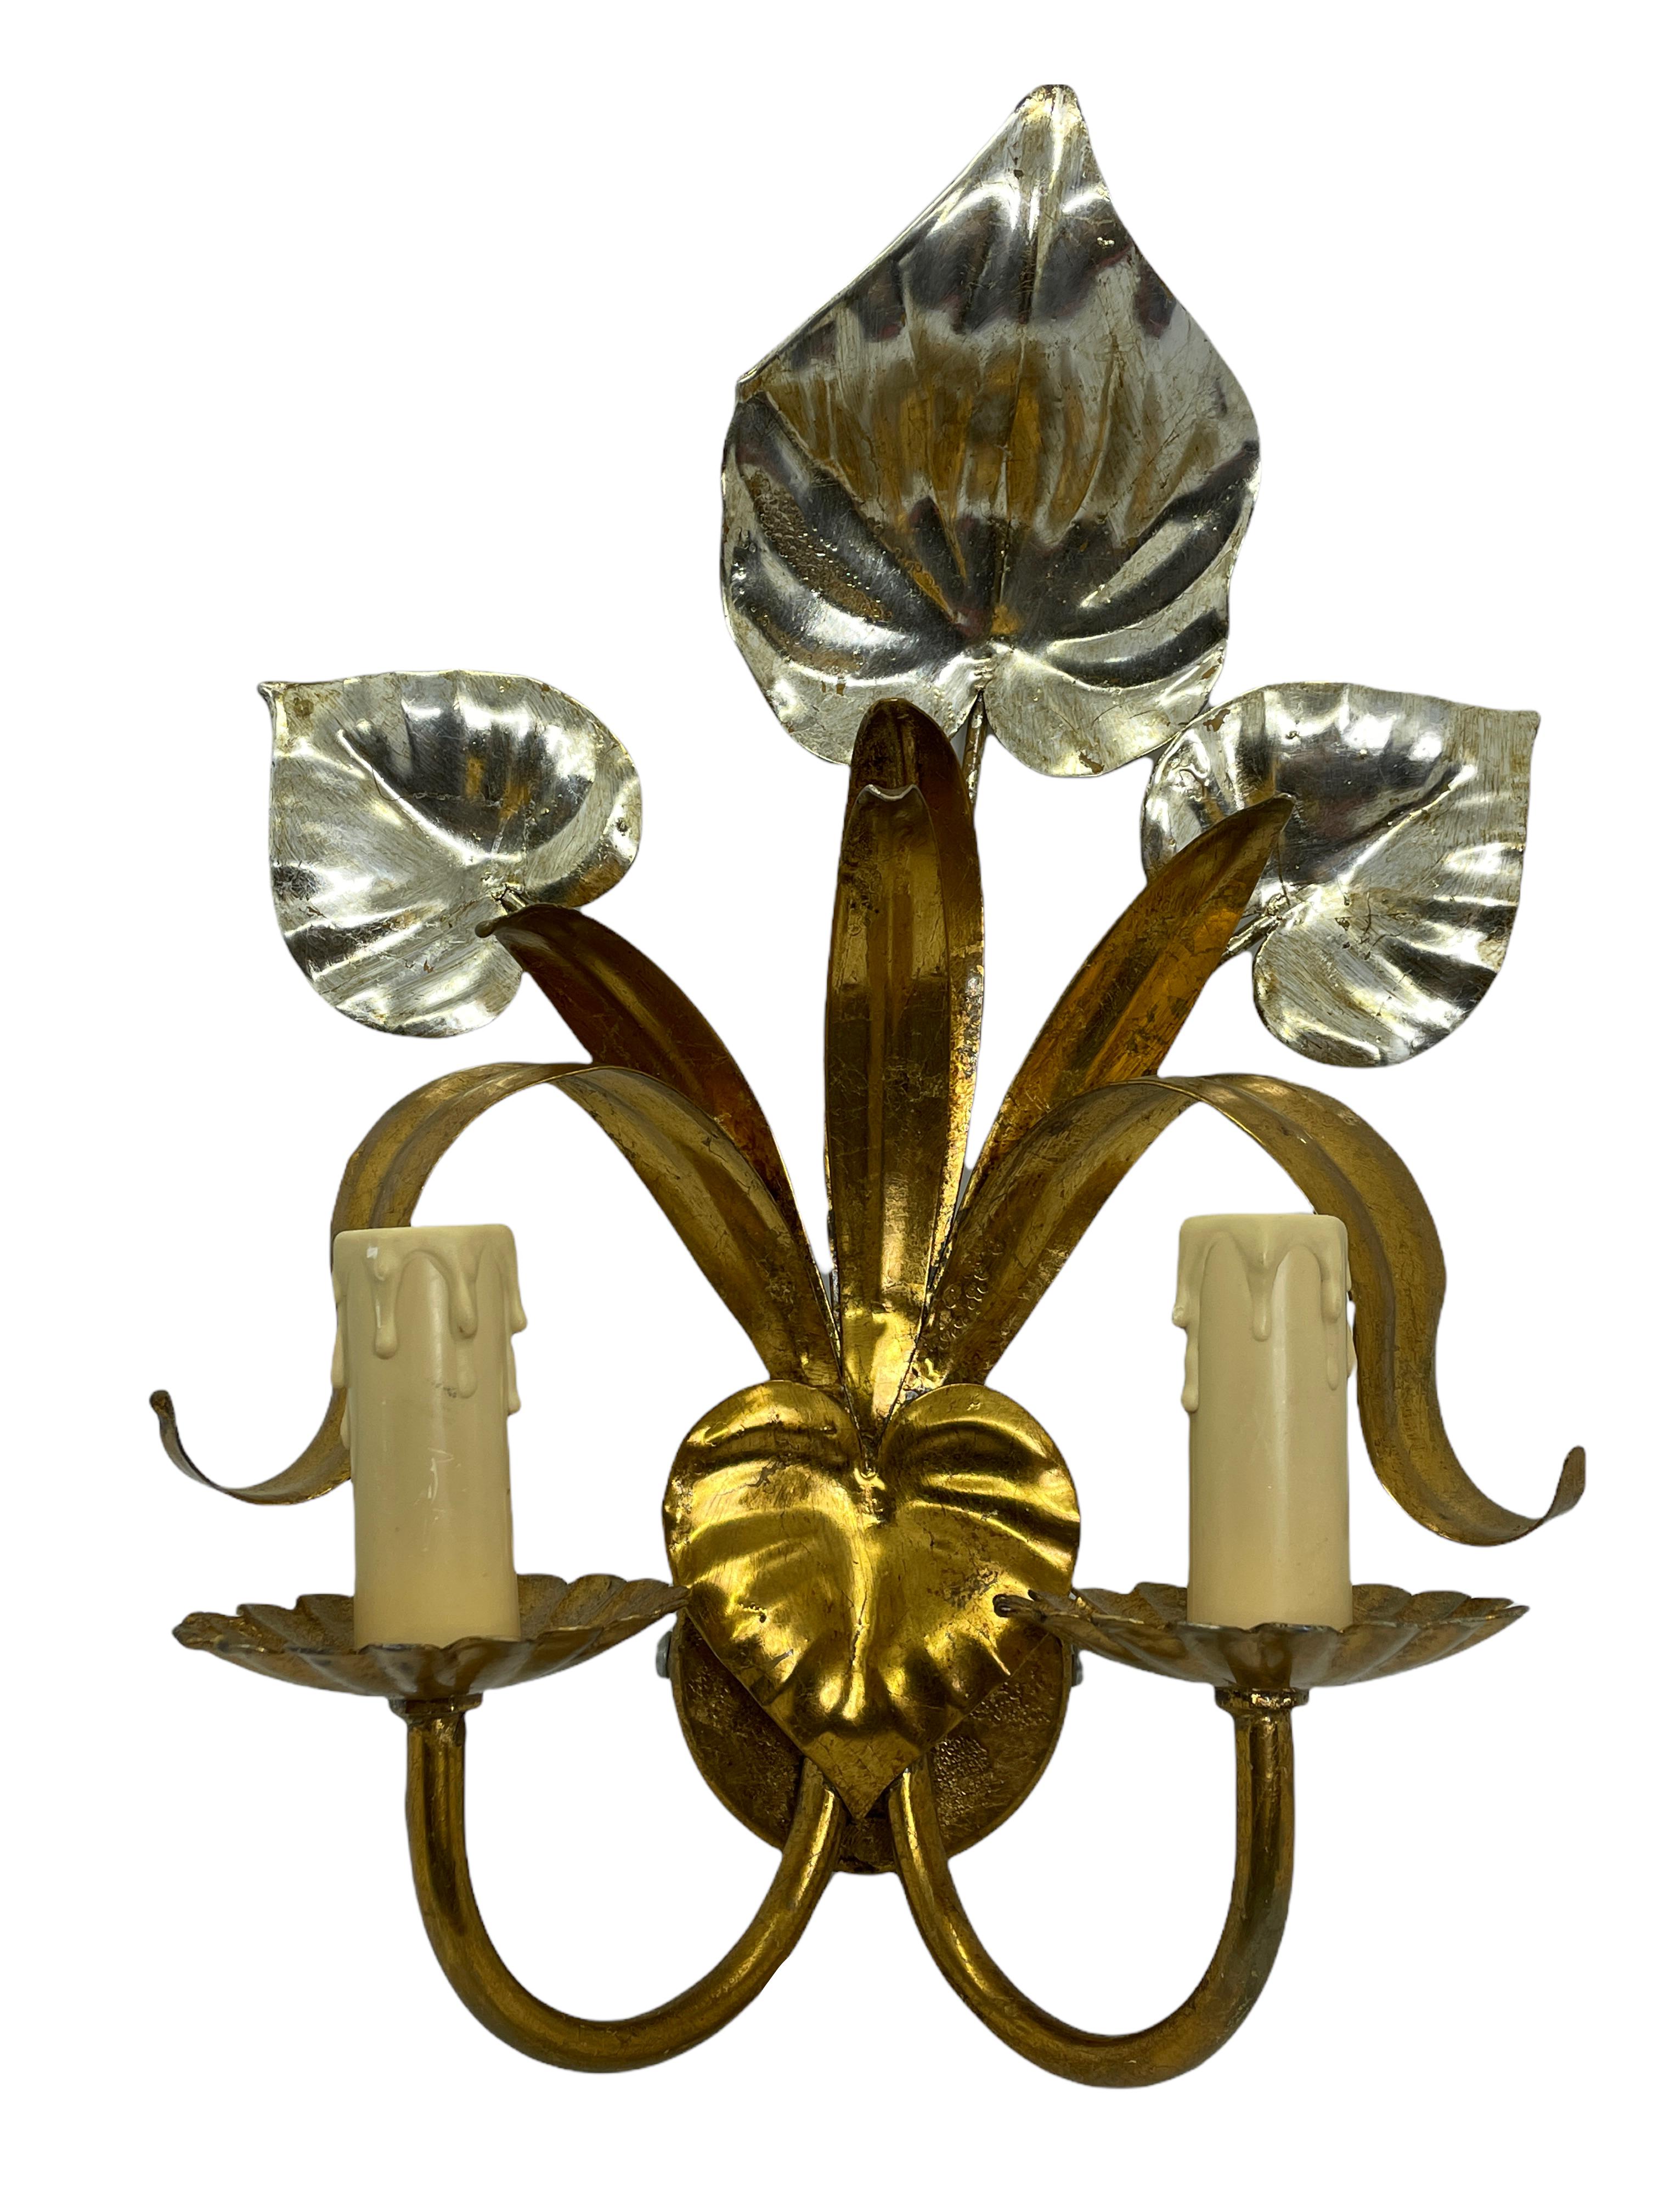 A Hollywood Regency midcentury gilt tolesconce, the fixture requires two European E14 candelabra bulbs, each bulb up to 40 watts. This wall light has a beautiful patina and gives each room an eclectic statement.